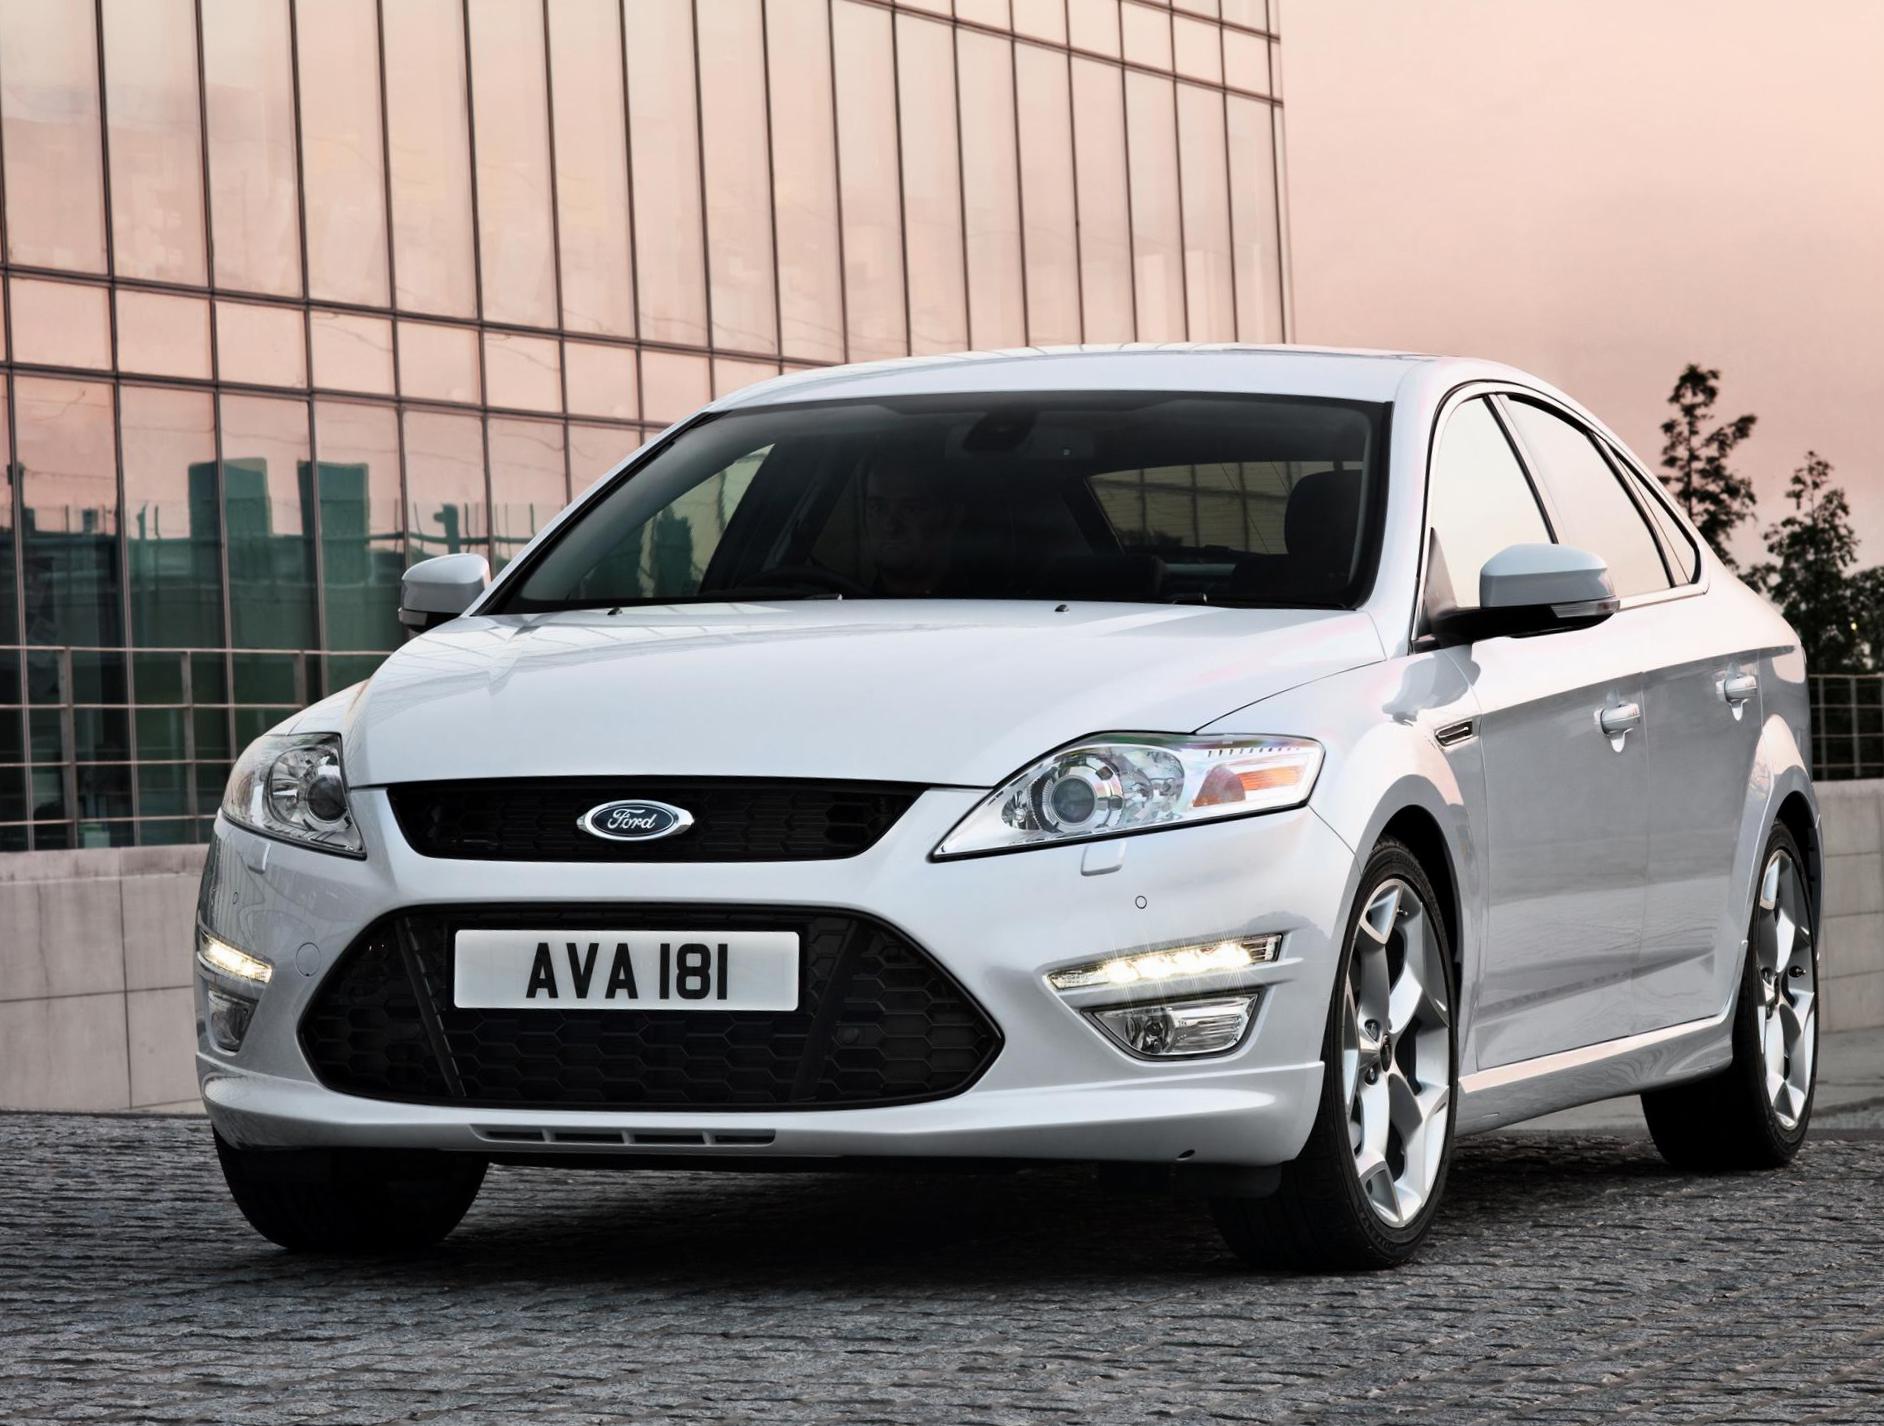 Mondeo Hatchback Ford price coupe